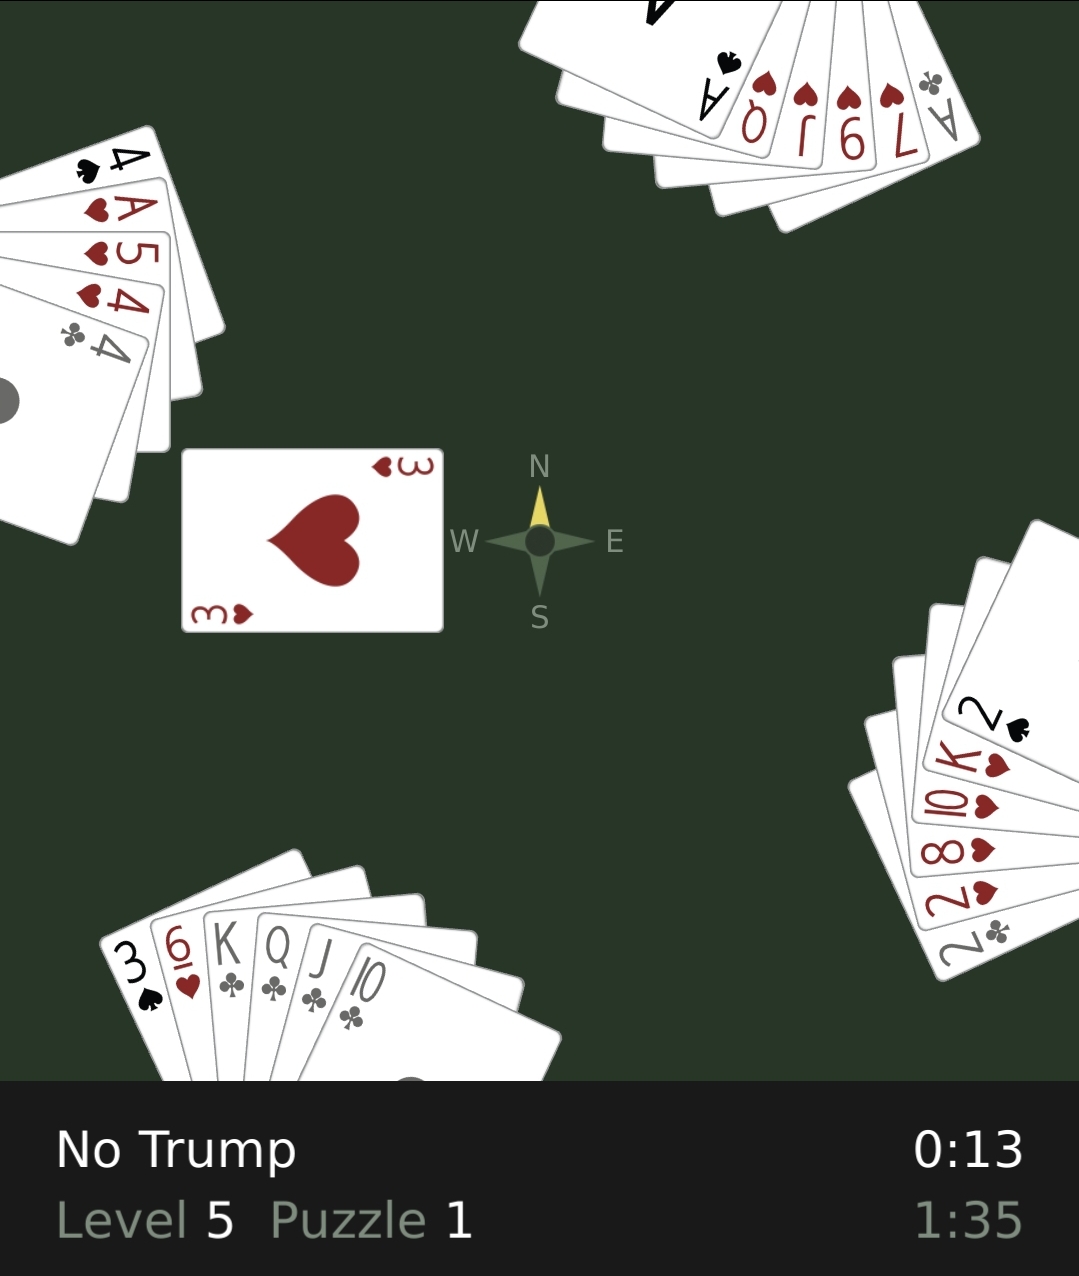 Play trumps now or later? - Learn how to play bridge online at Sky Bridge  Club - Youth World Bridge